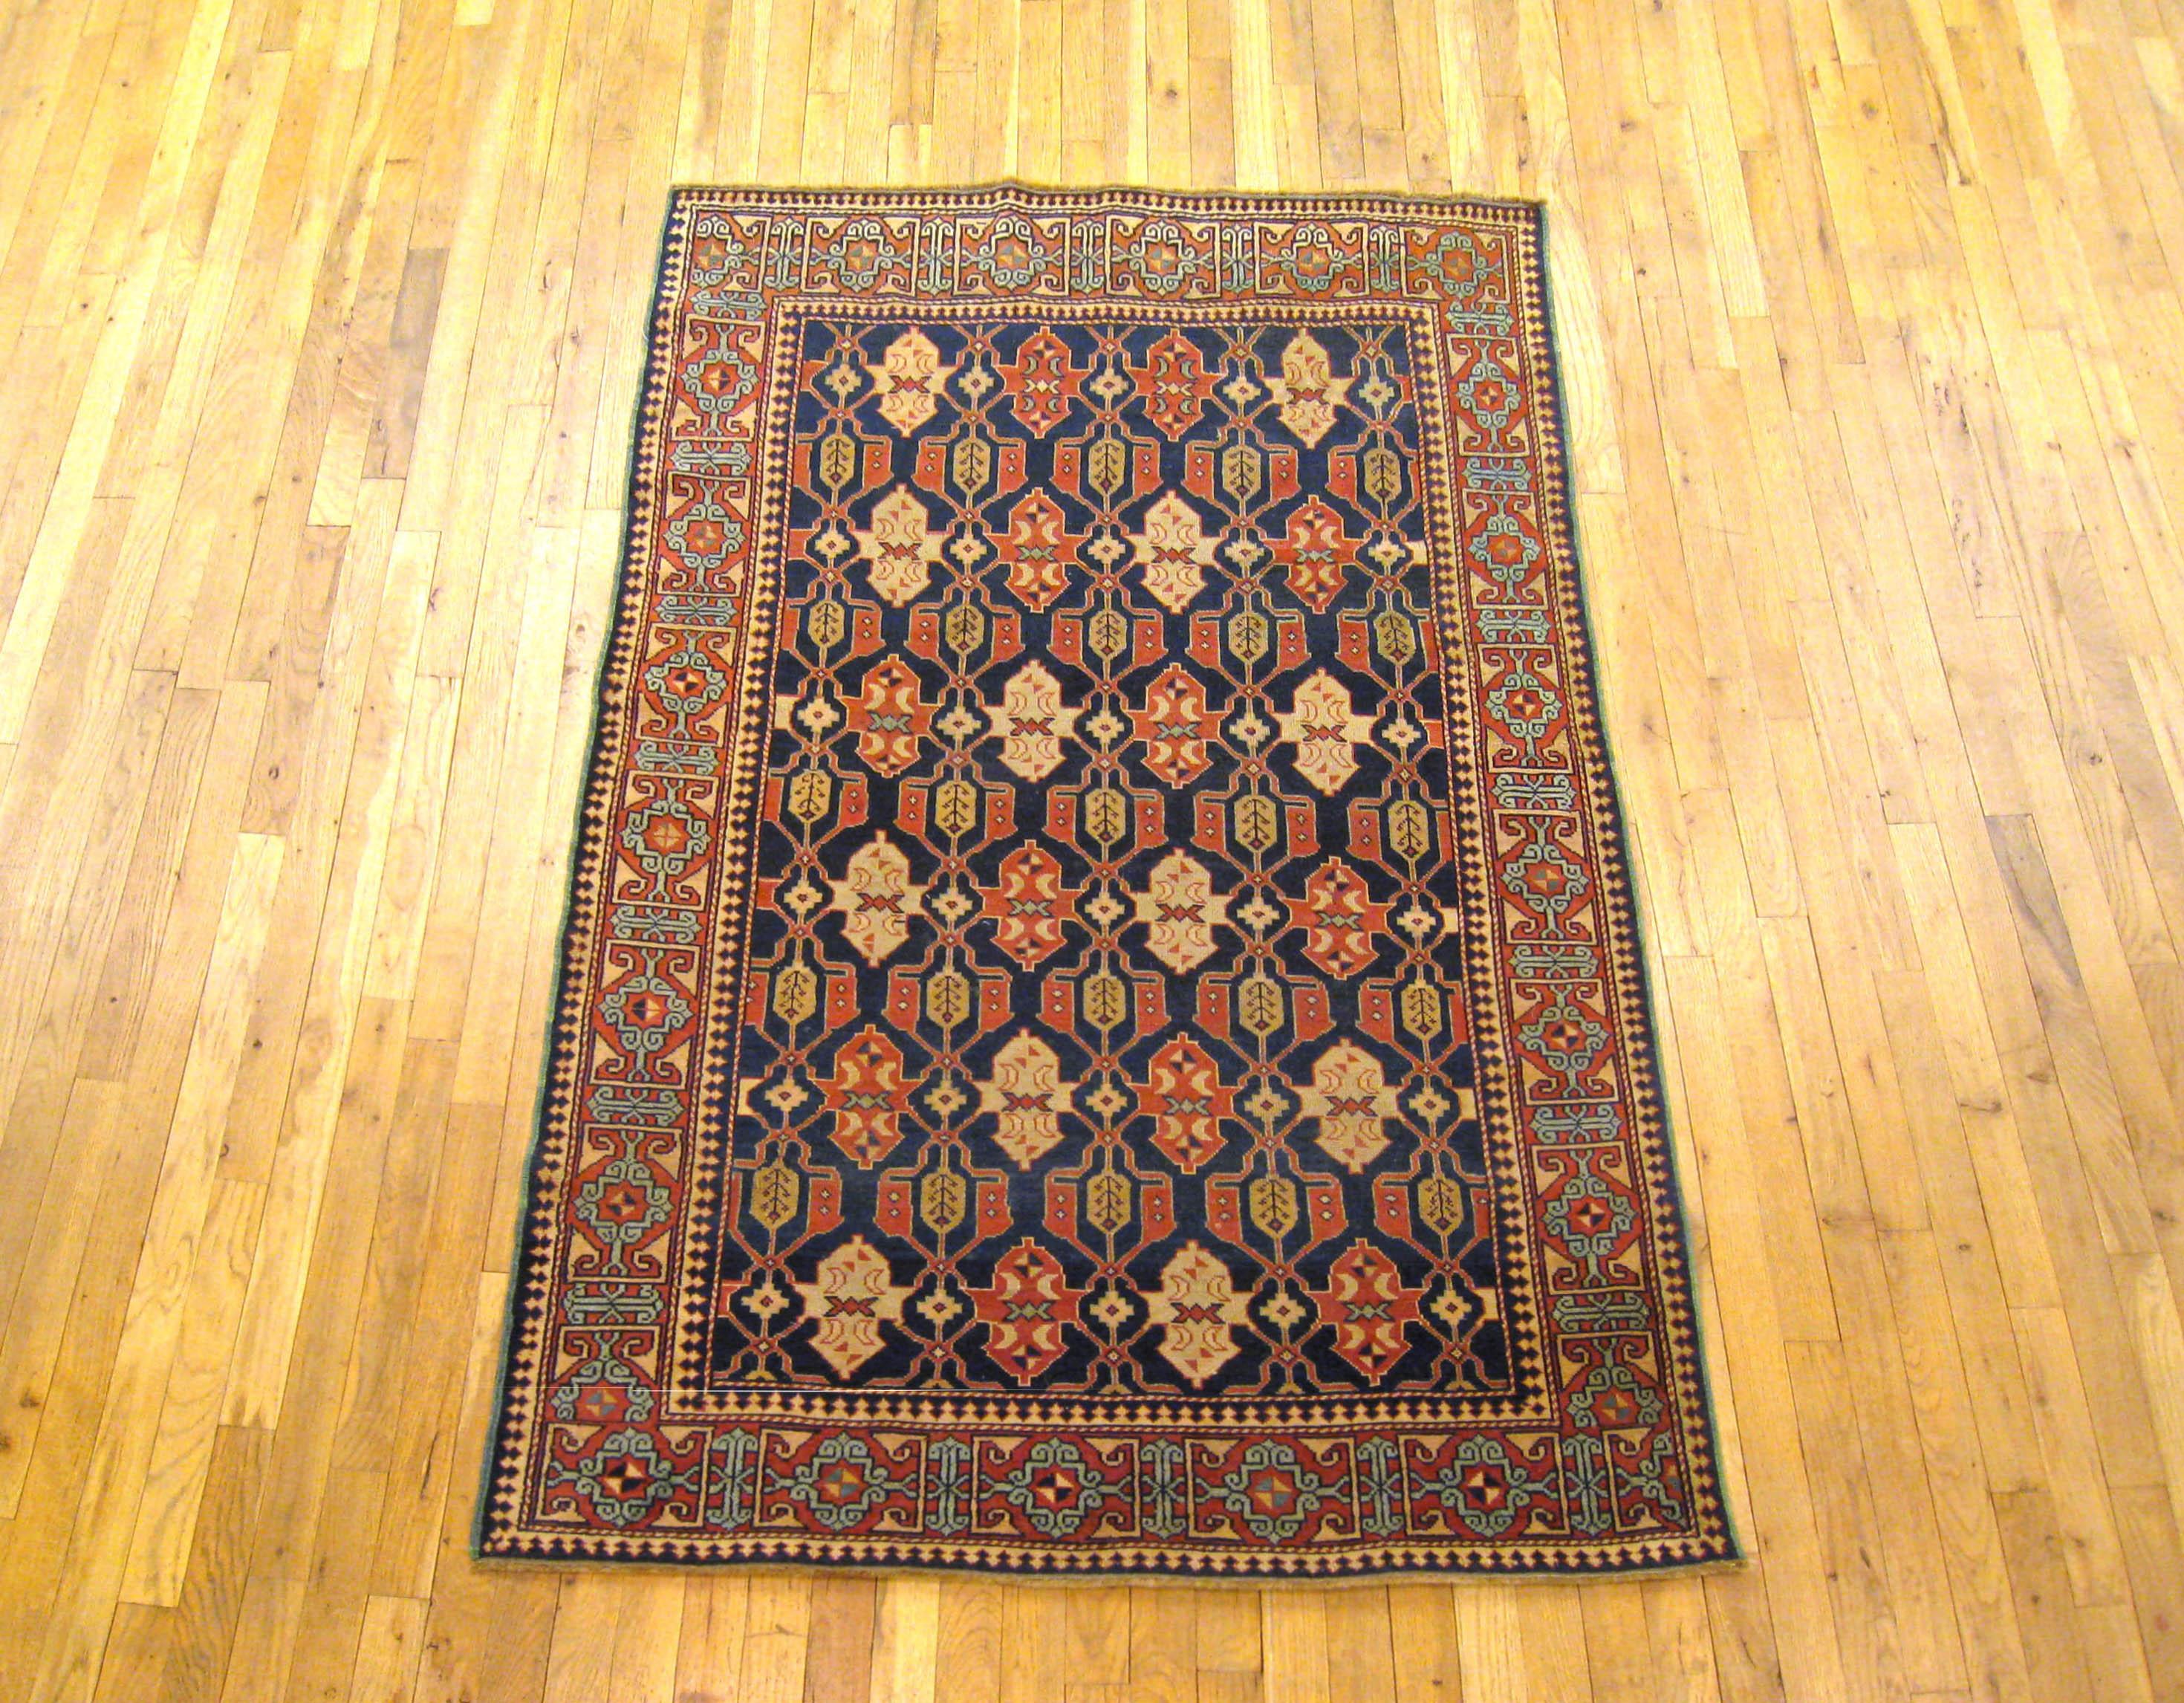 An antique Caucasian Kuba oriental rug, circa 1900, size 6' x 4'. This handsome carpet features a repeating geometric design in the deep blue field and a strong scrolling border of complimentary color and design. This is a good, solid rug, great for